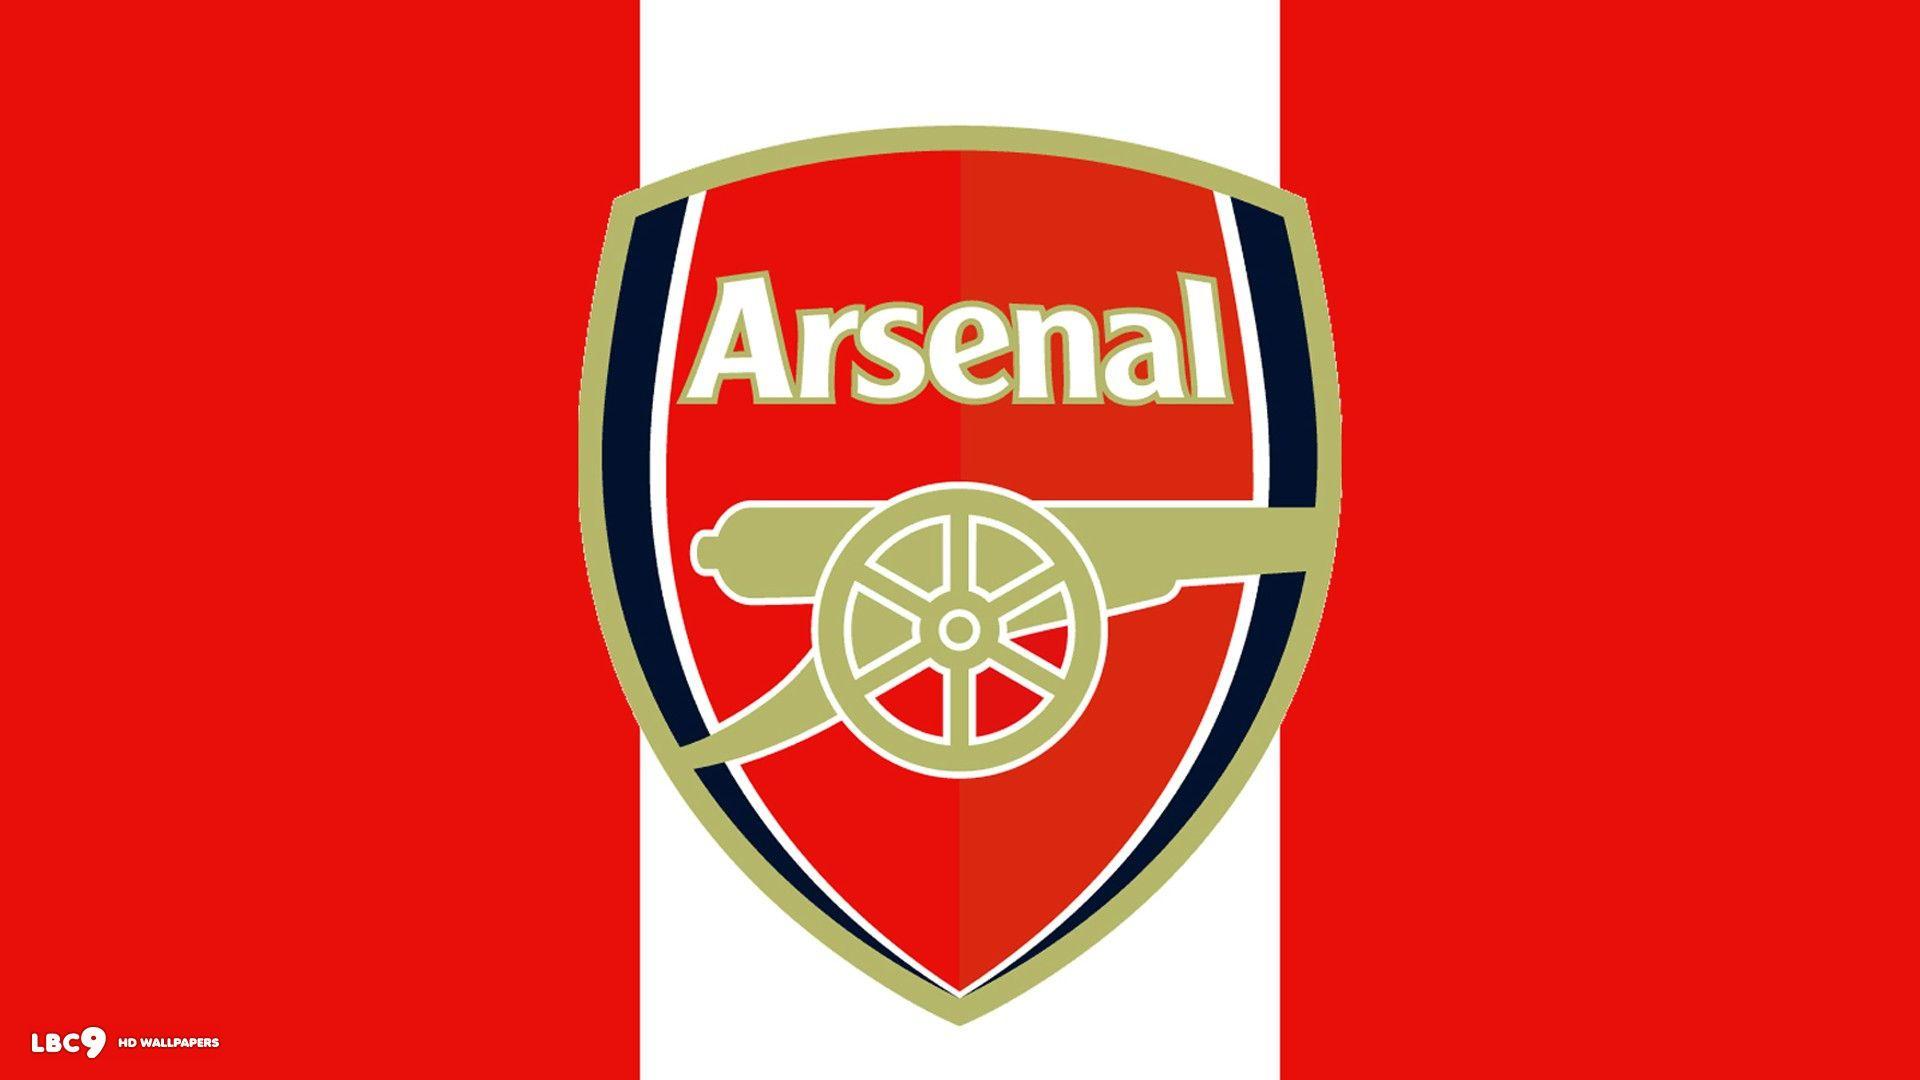 Arsenal FC Wallpaper and Windows 10 Theme. All for Windows 10 Free